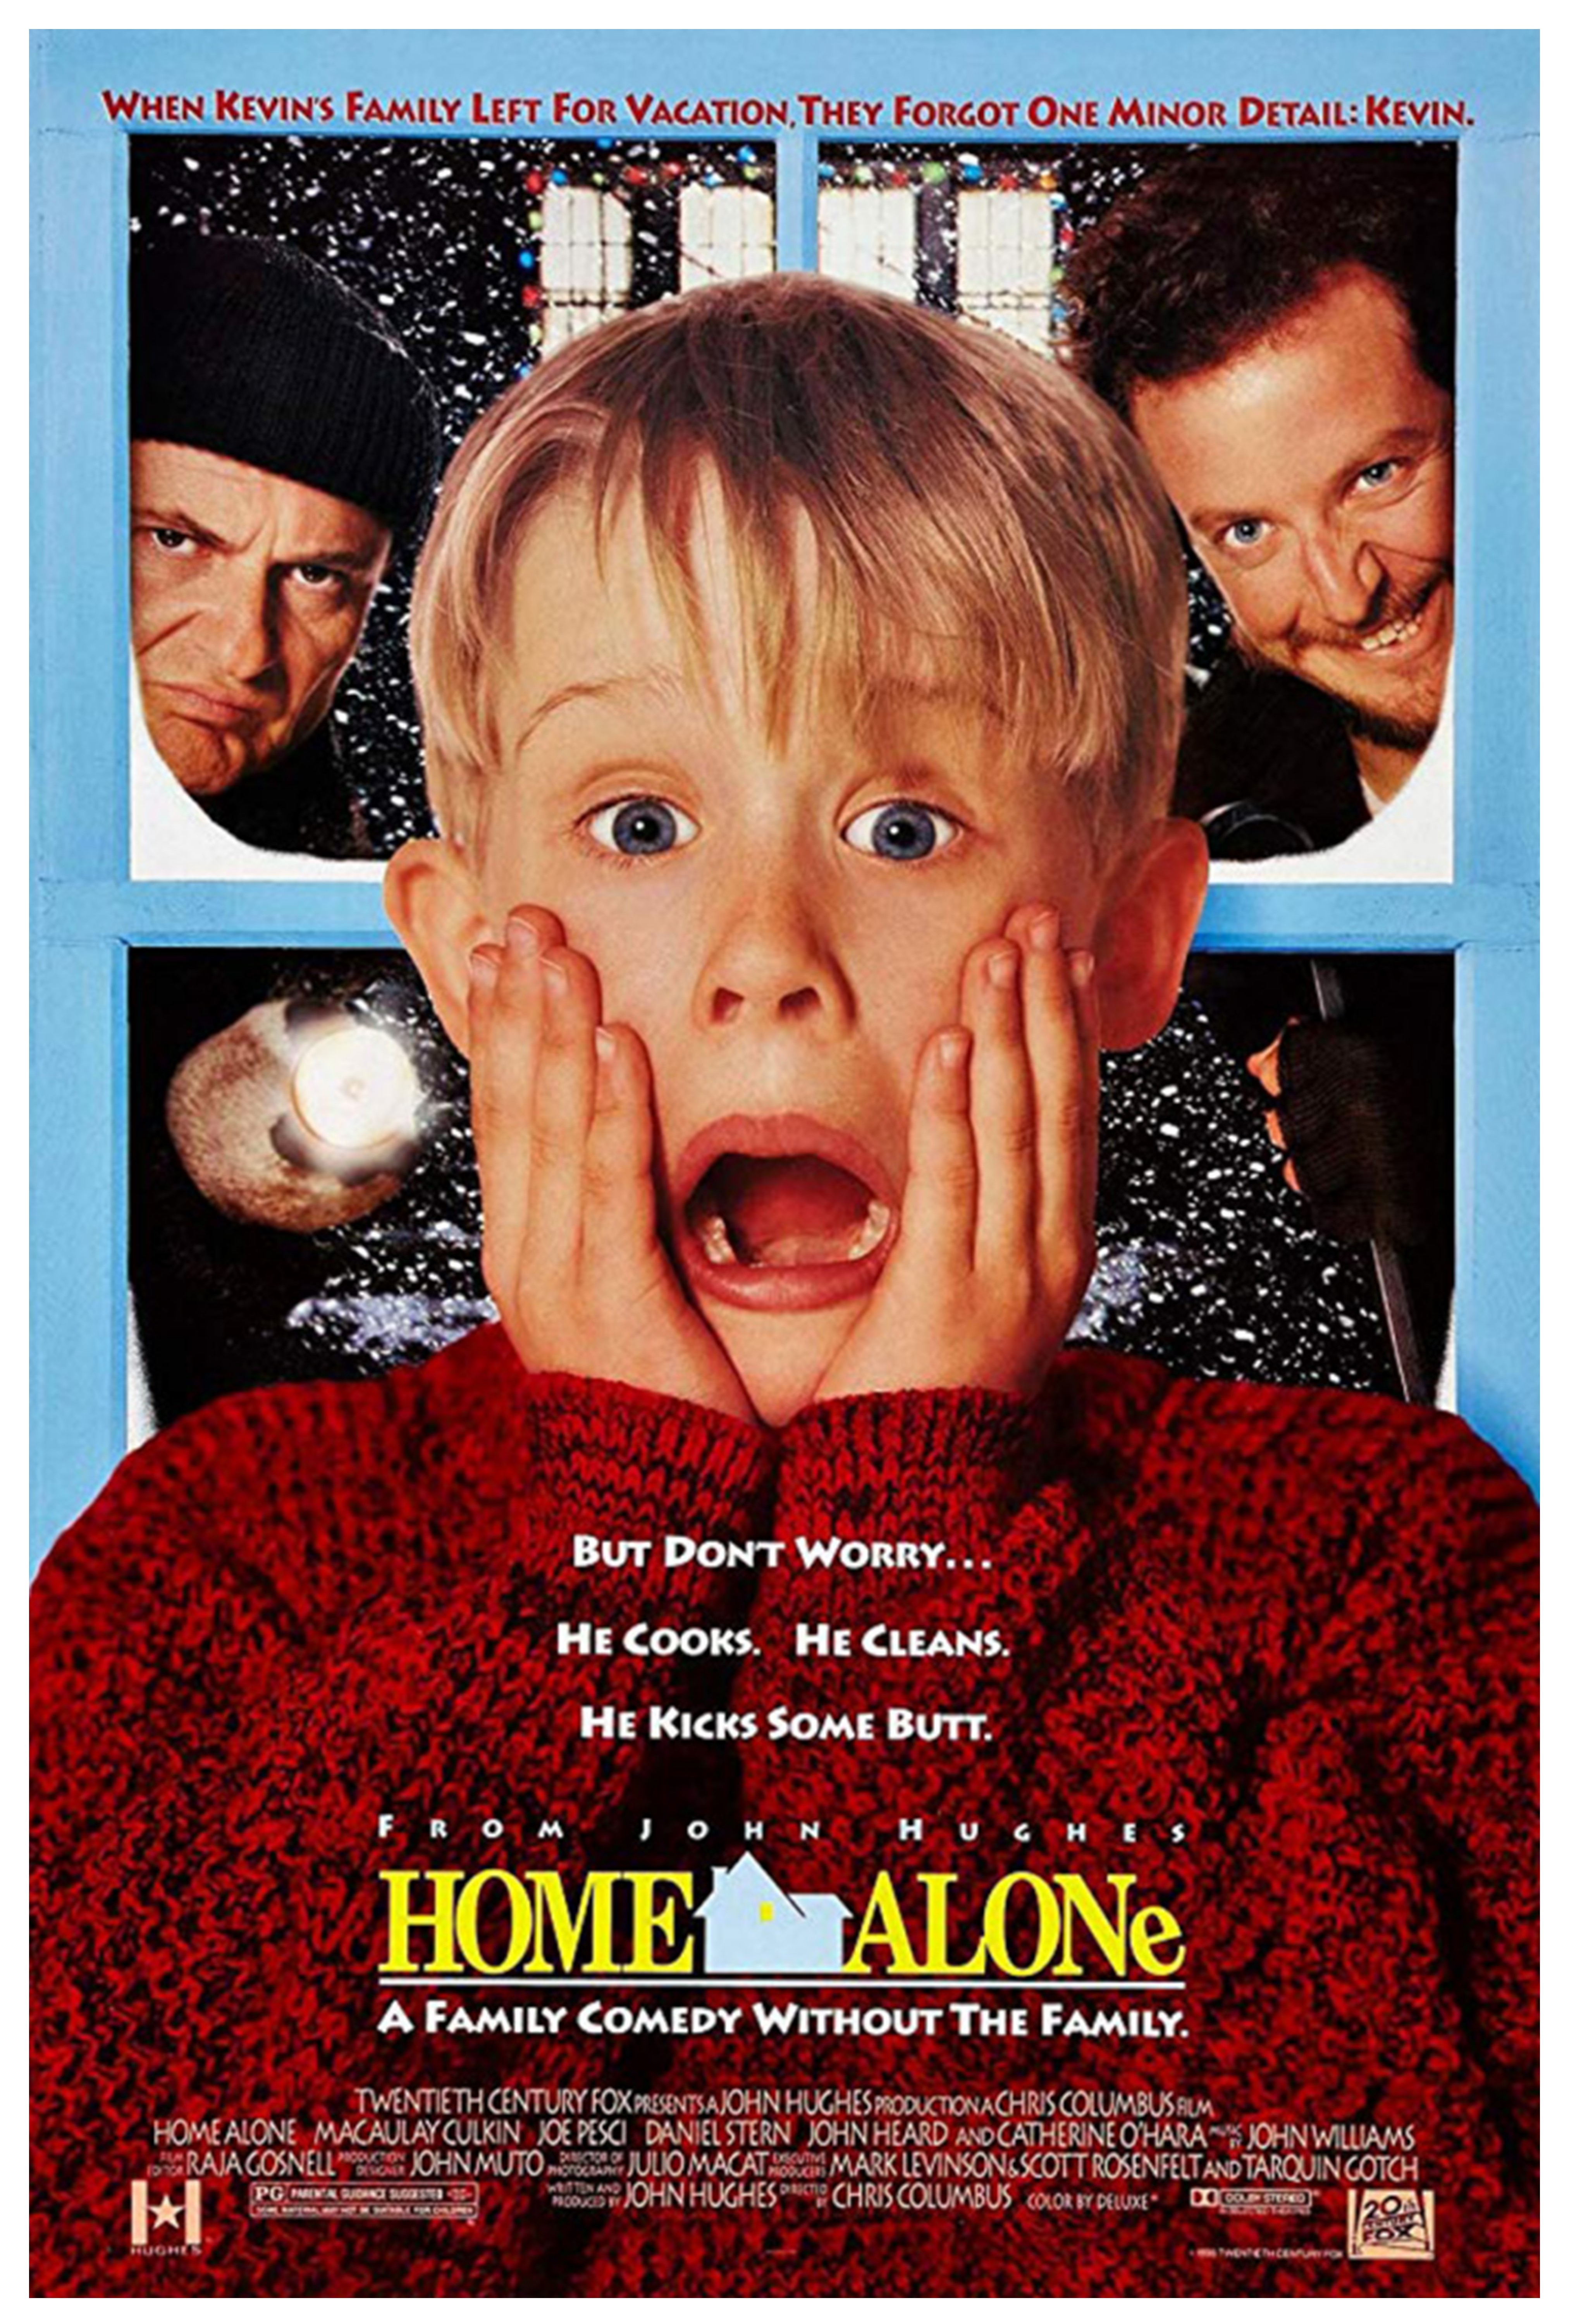 Film poster for Home Alone featuring a boy with a look of surprise and two people staring in through a window in the background.